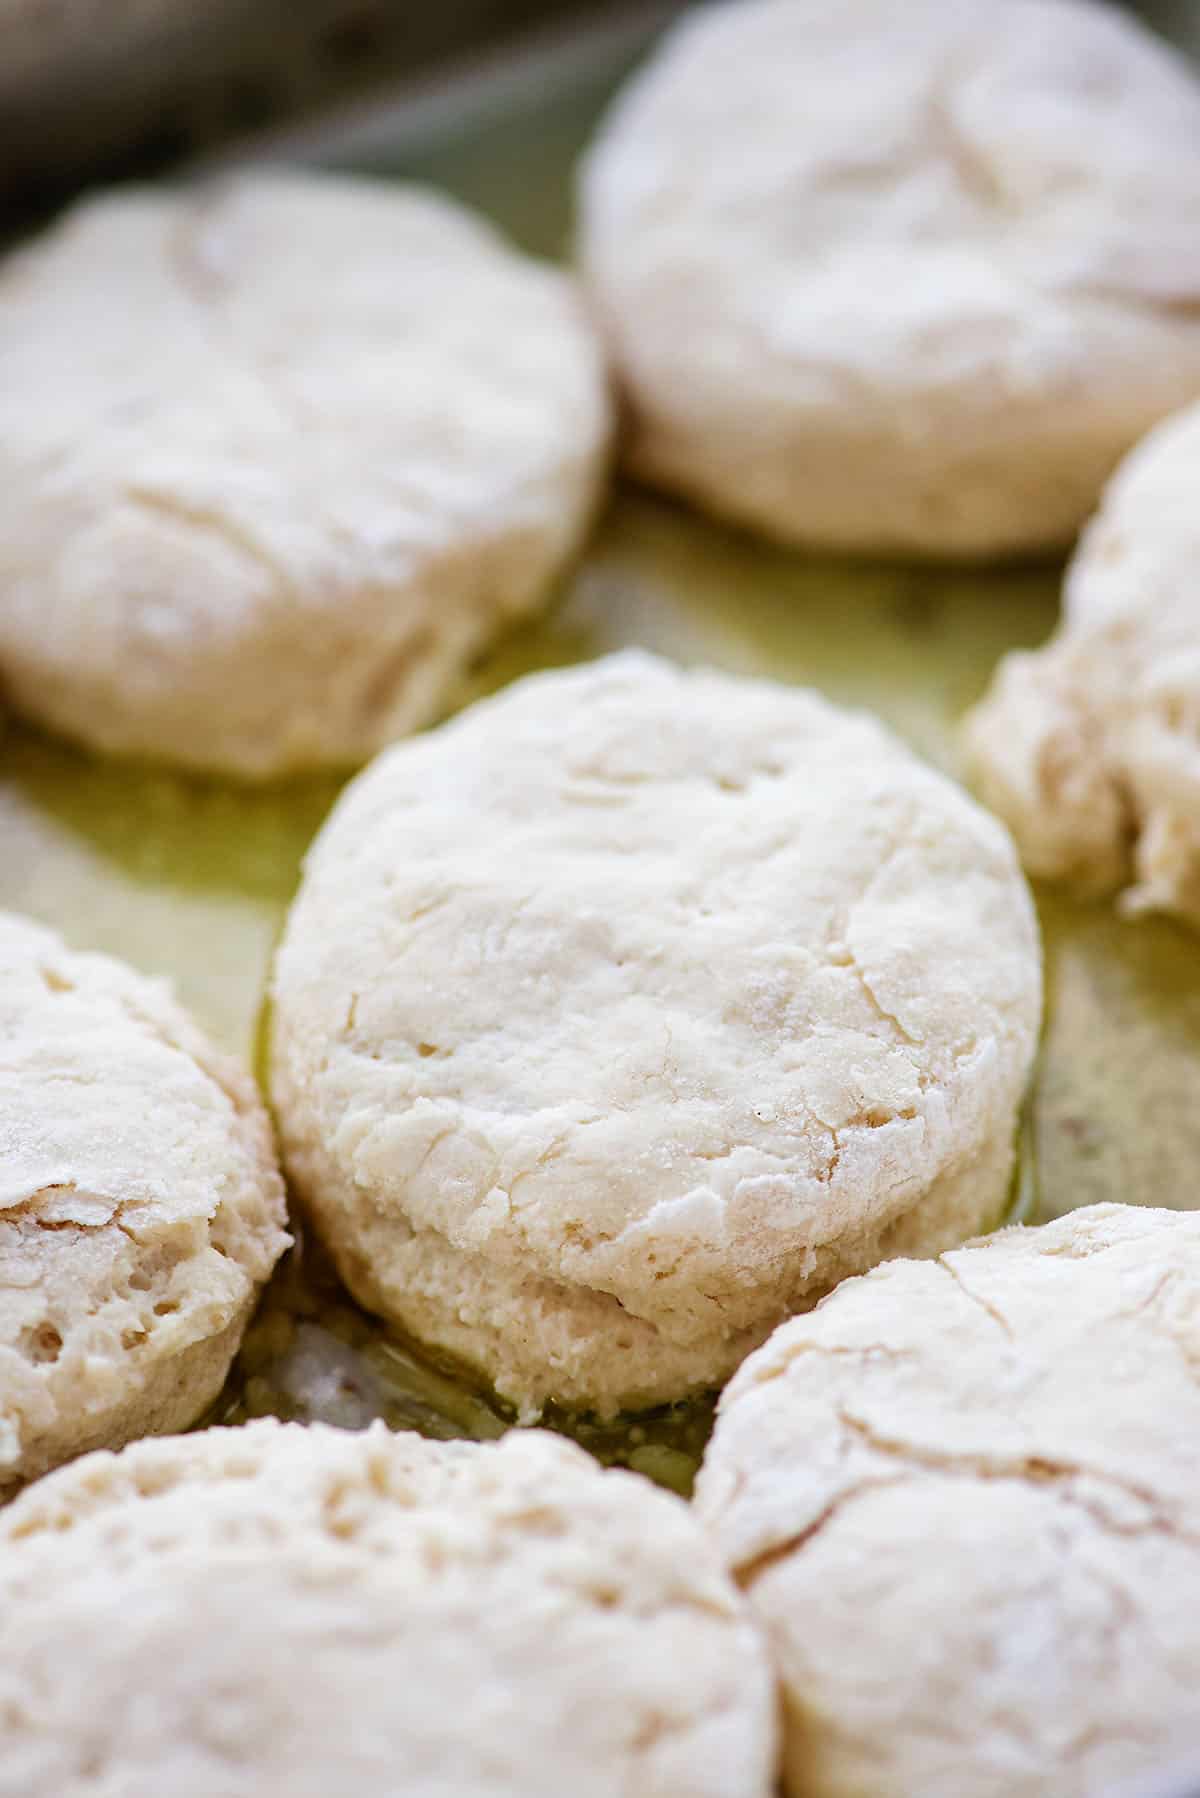 biscuit dough in buttered pan.